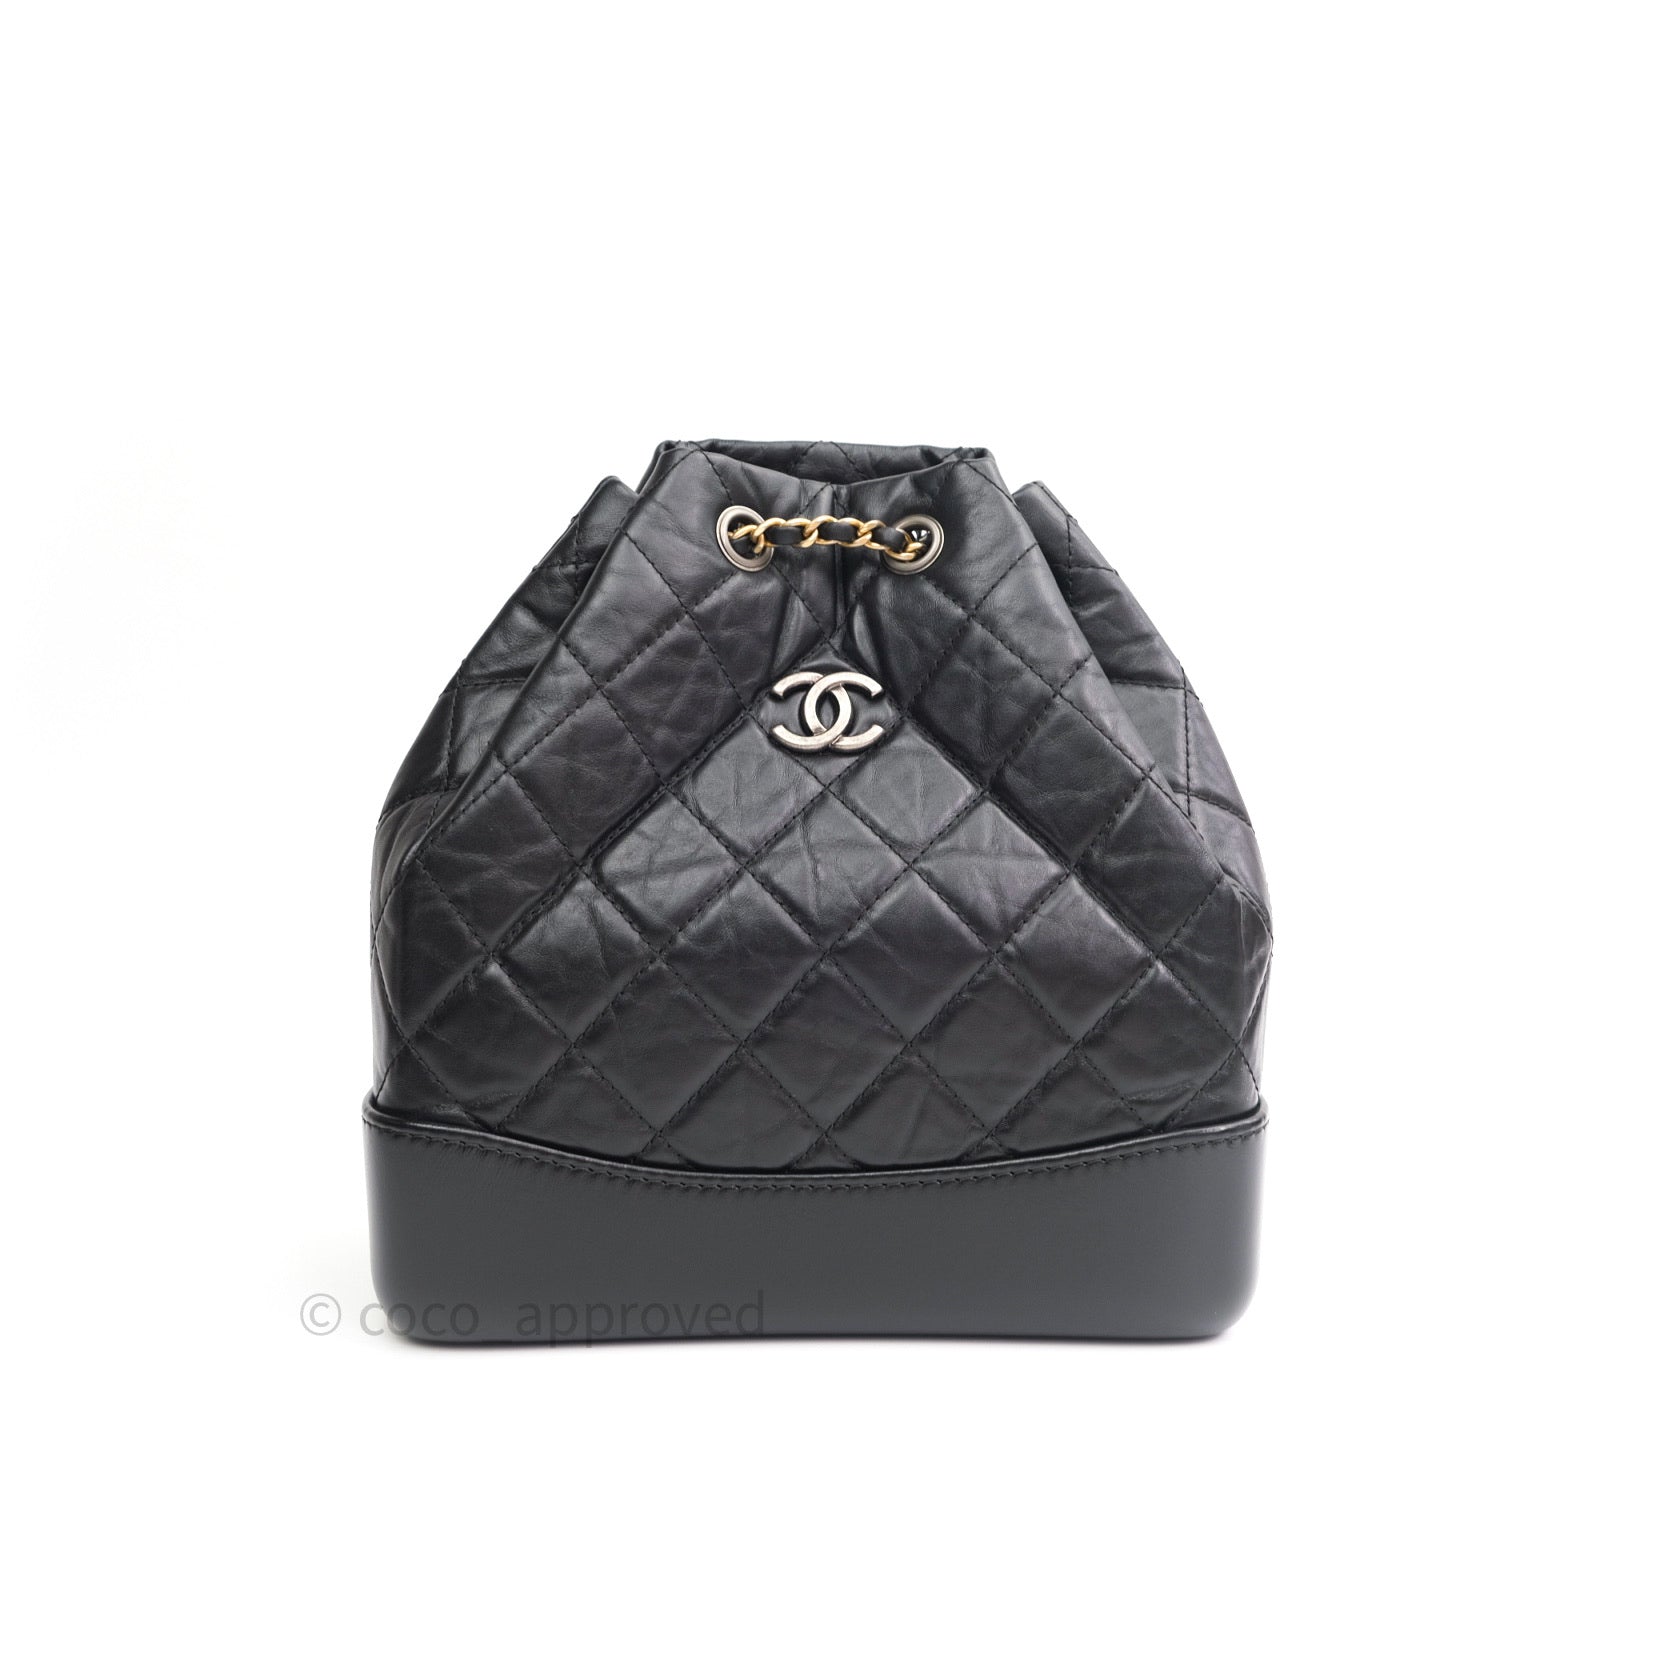 Chanel Gabrielle Backpack Black Aged Calfskin Small Black Mixed Hardwa –  Coco Approved Studio